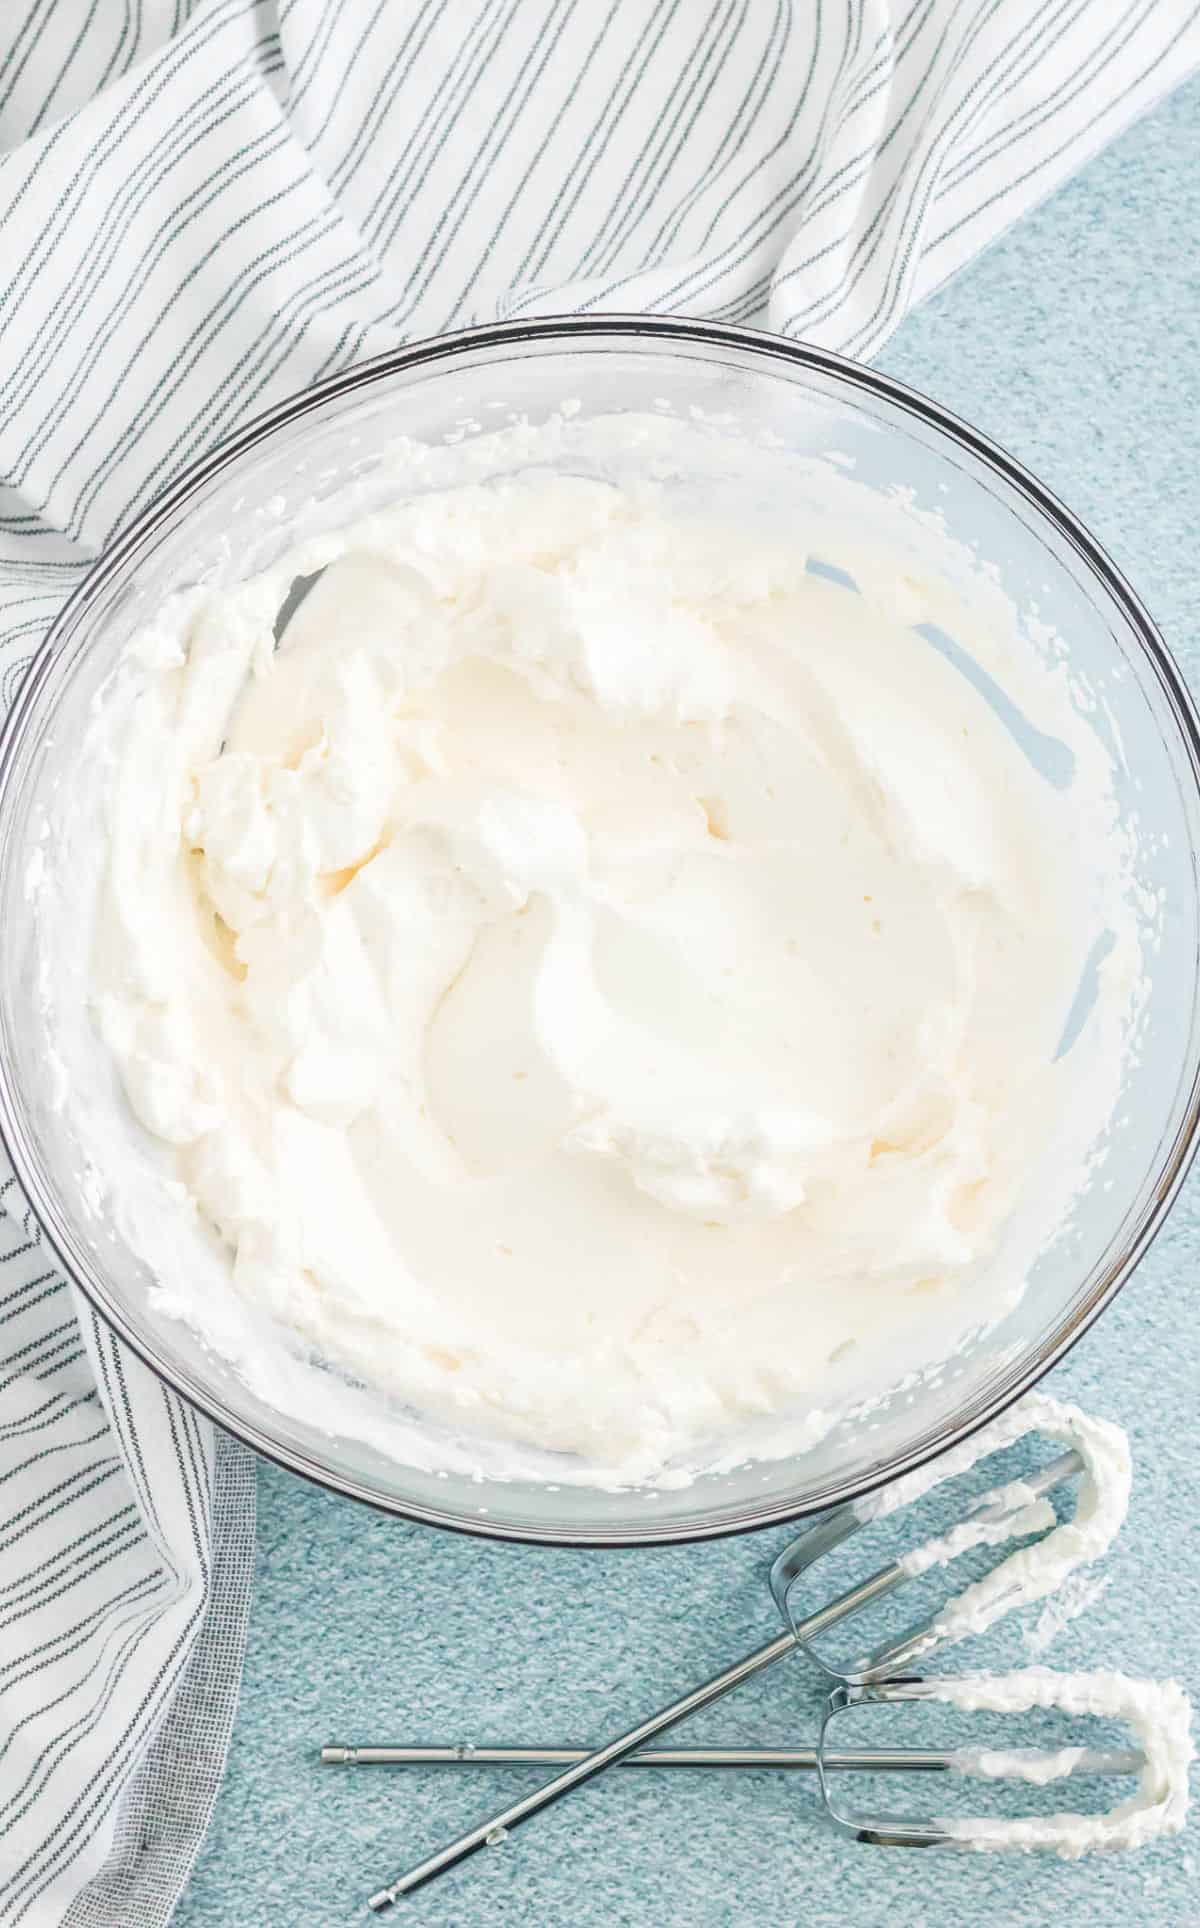 Whipped cream mixed in a bowl.